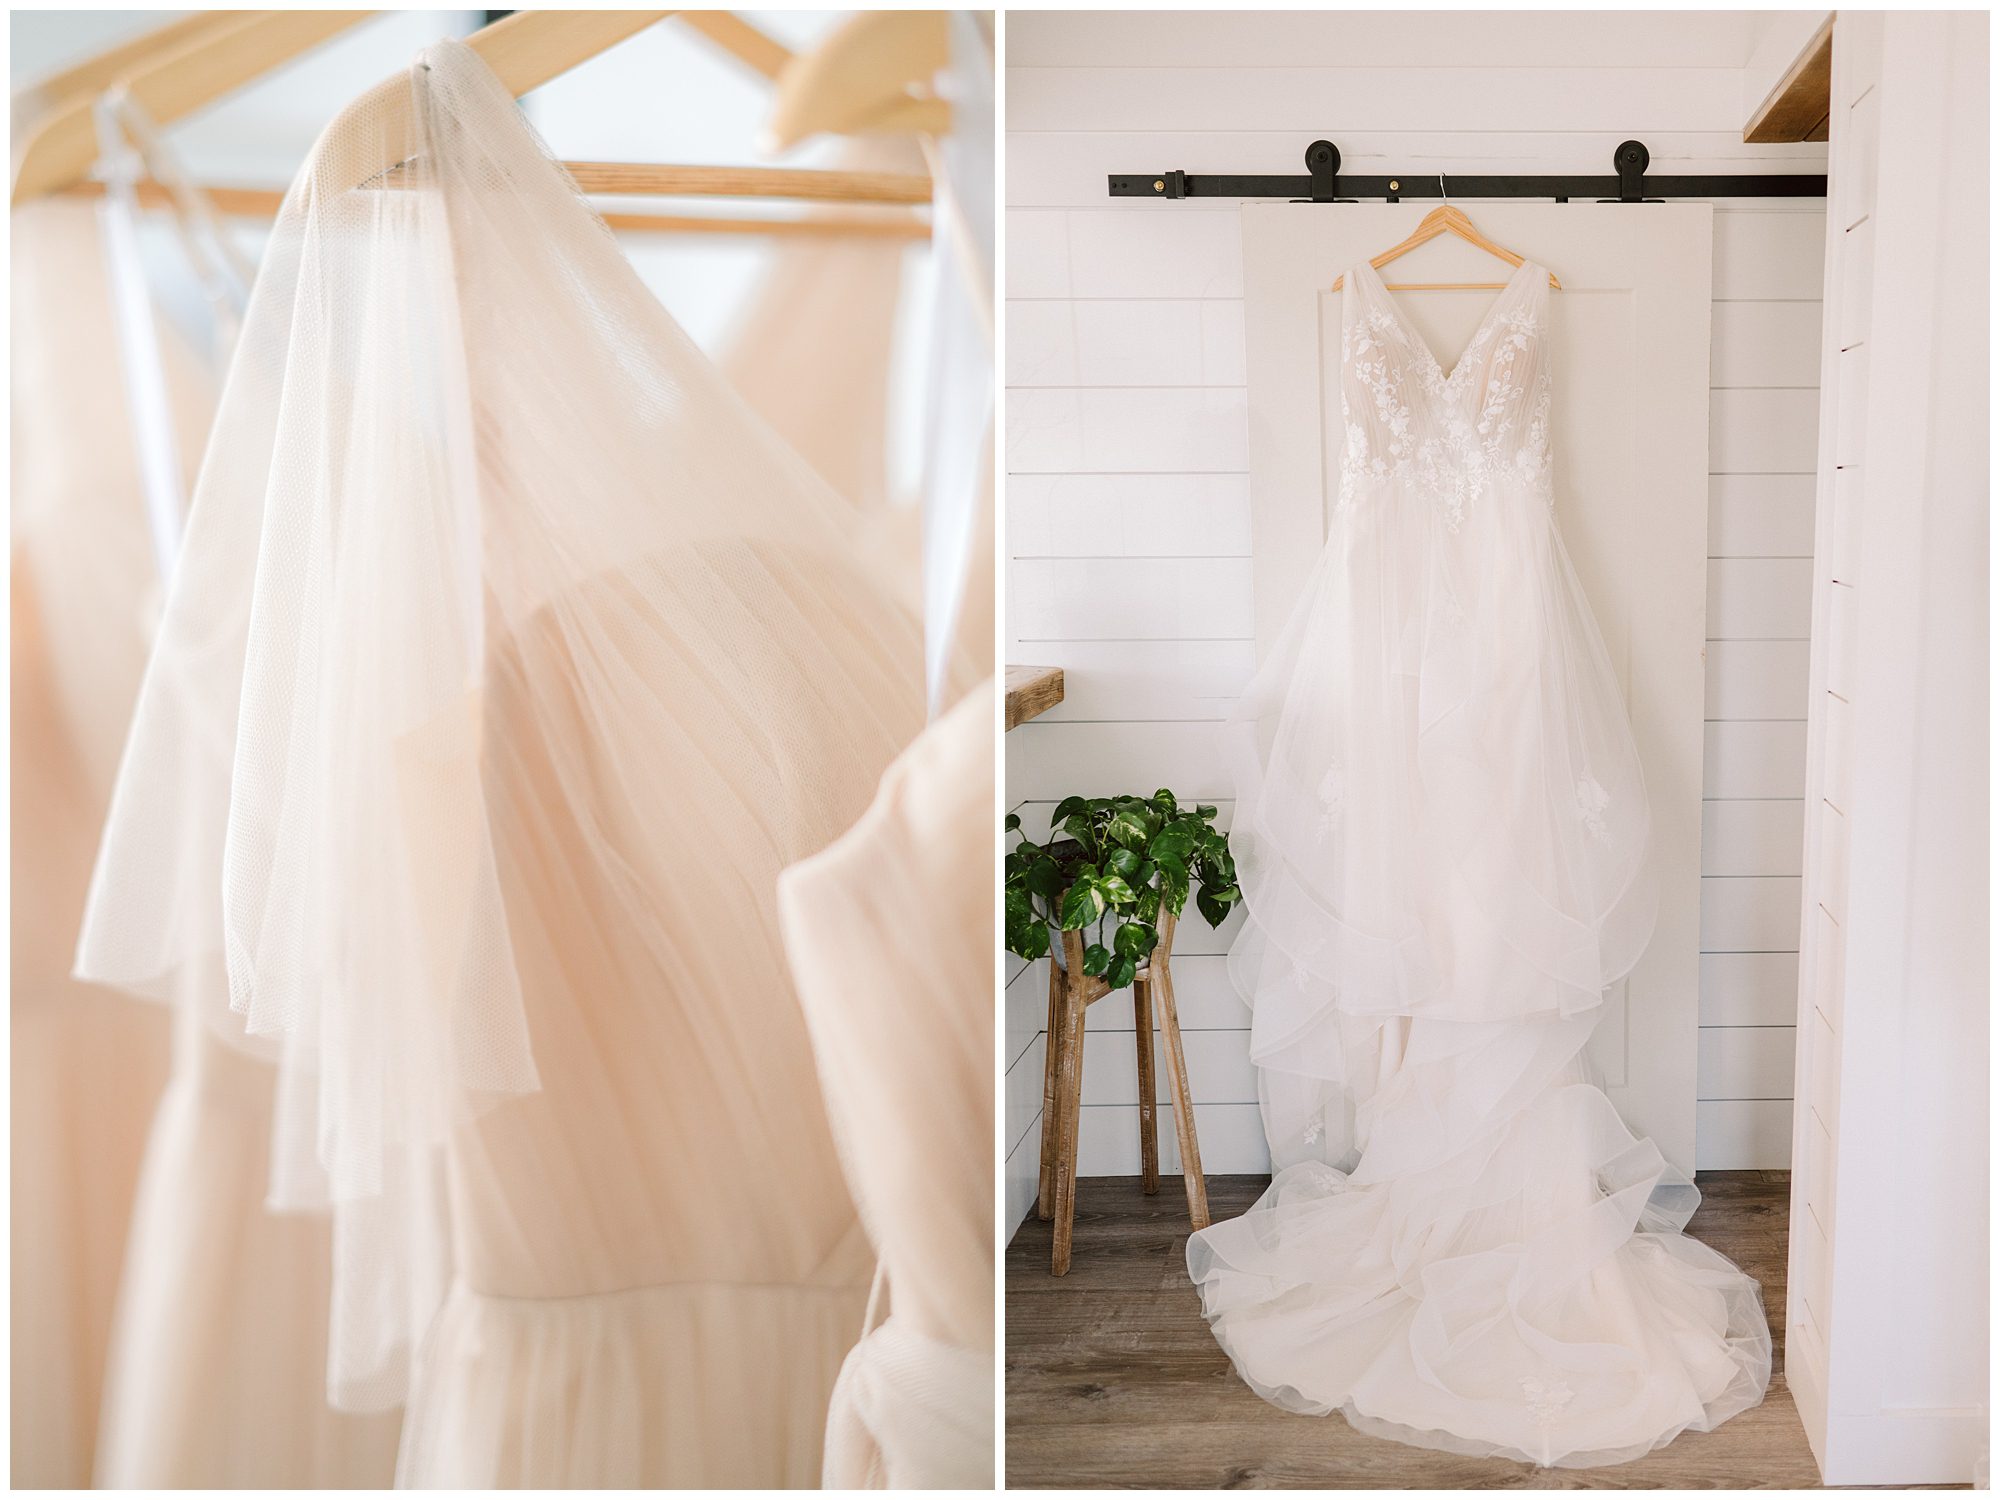 Wedding gown and bridesmaid dresses hanging in the salon at Viewpoint Hotel.